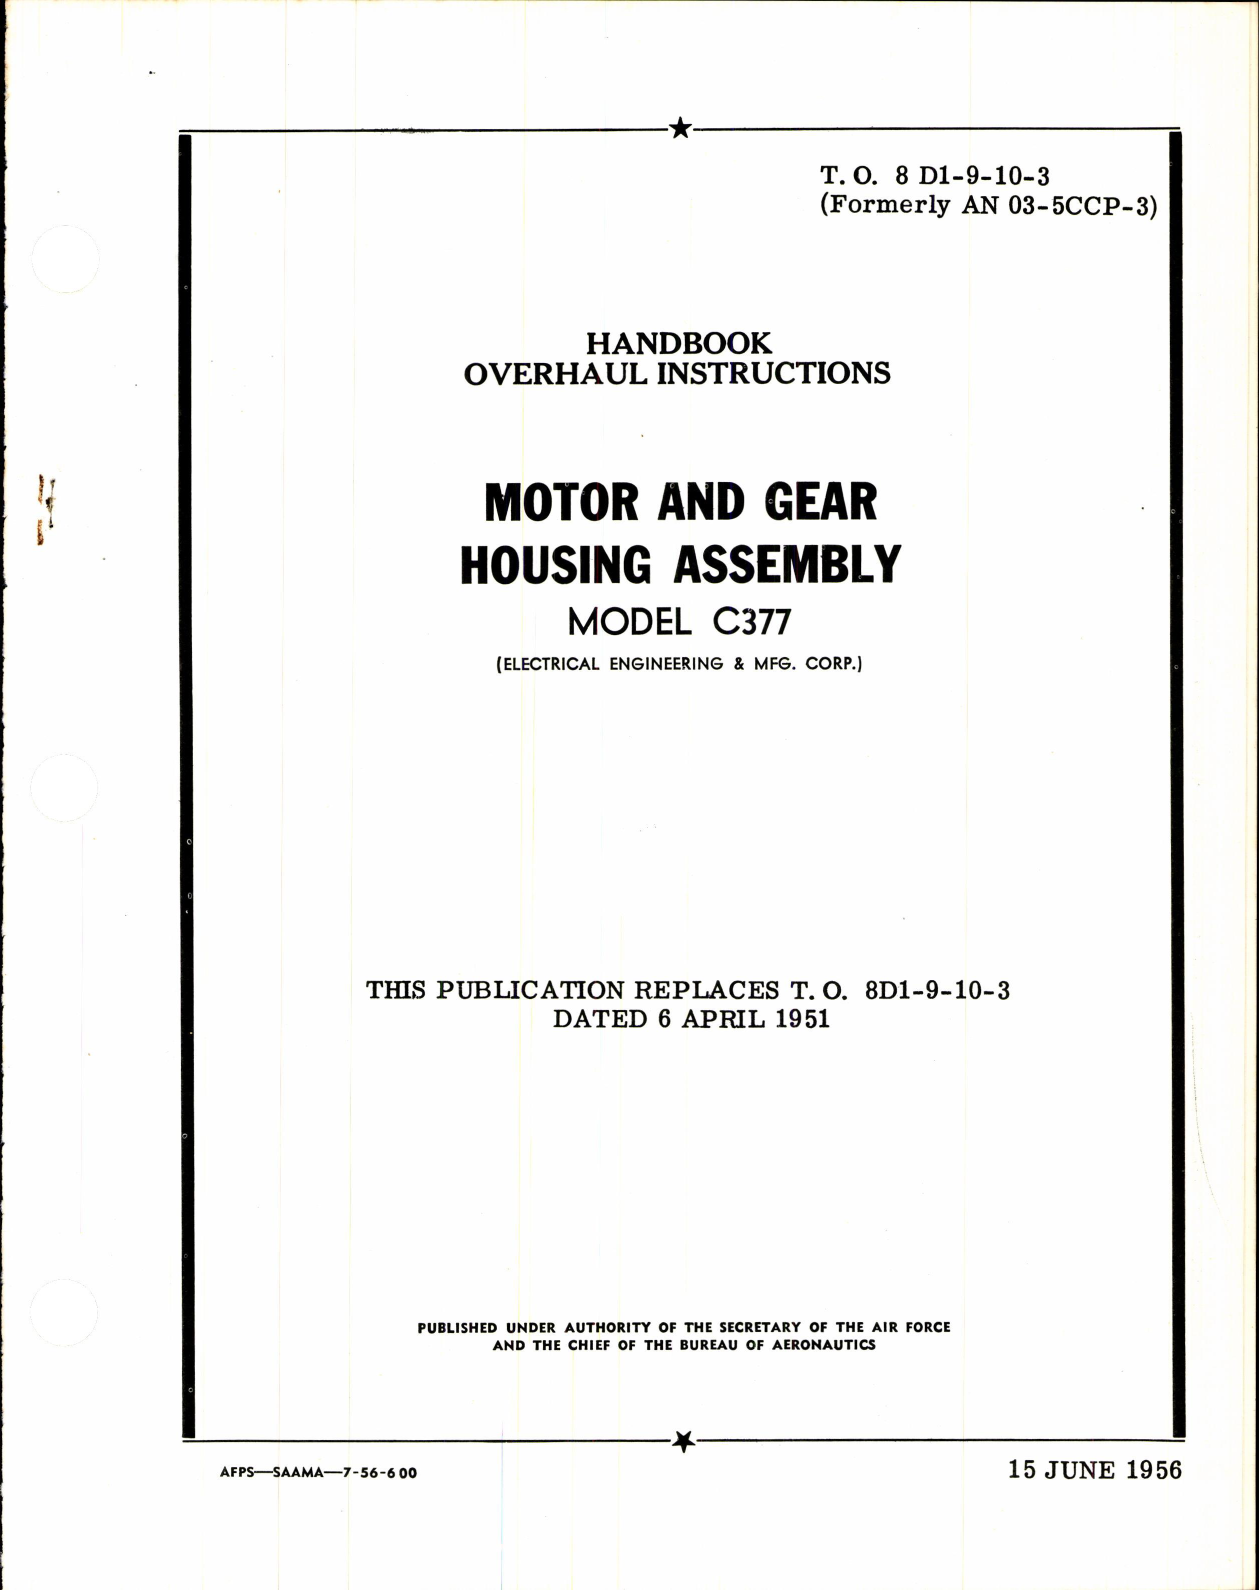 Sample page 1 from AirCorps Library document: Overhaul Instructions for Motor and Gear Housing Assembly Model C377